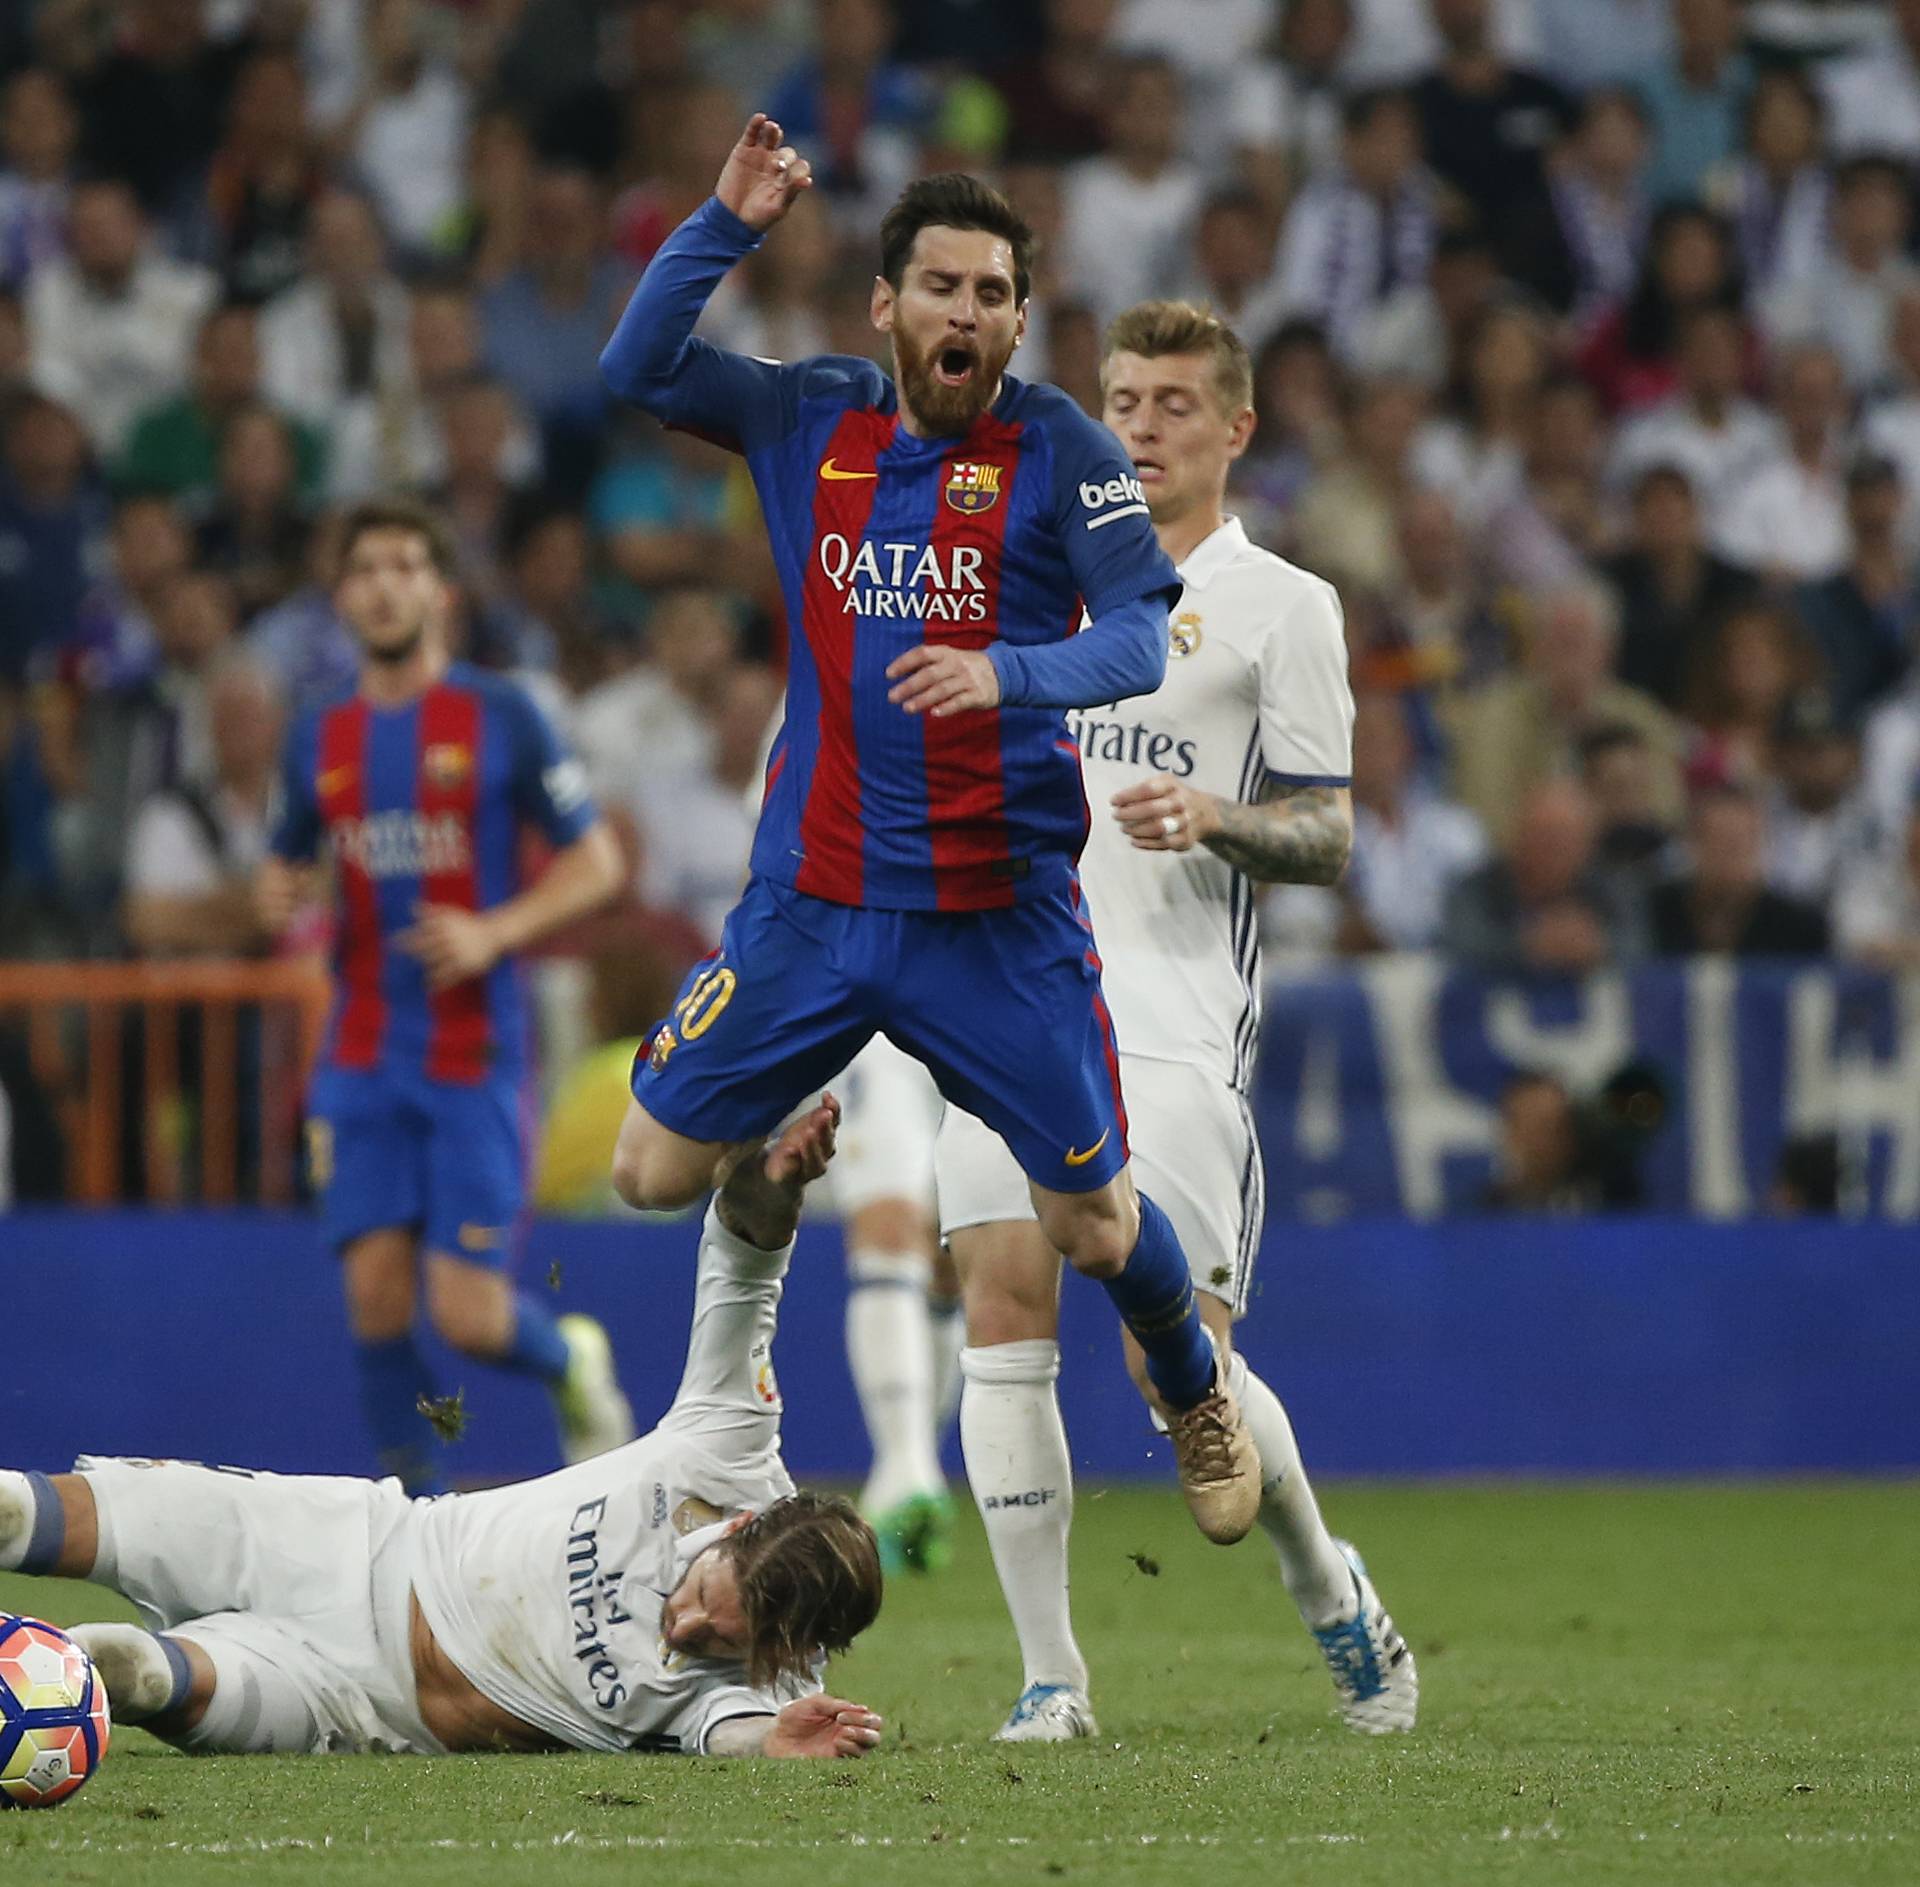 Real Madrid's Sergio Ramos is sent off after this challenge on Barcelona's Lionel Messi